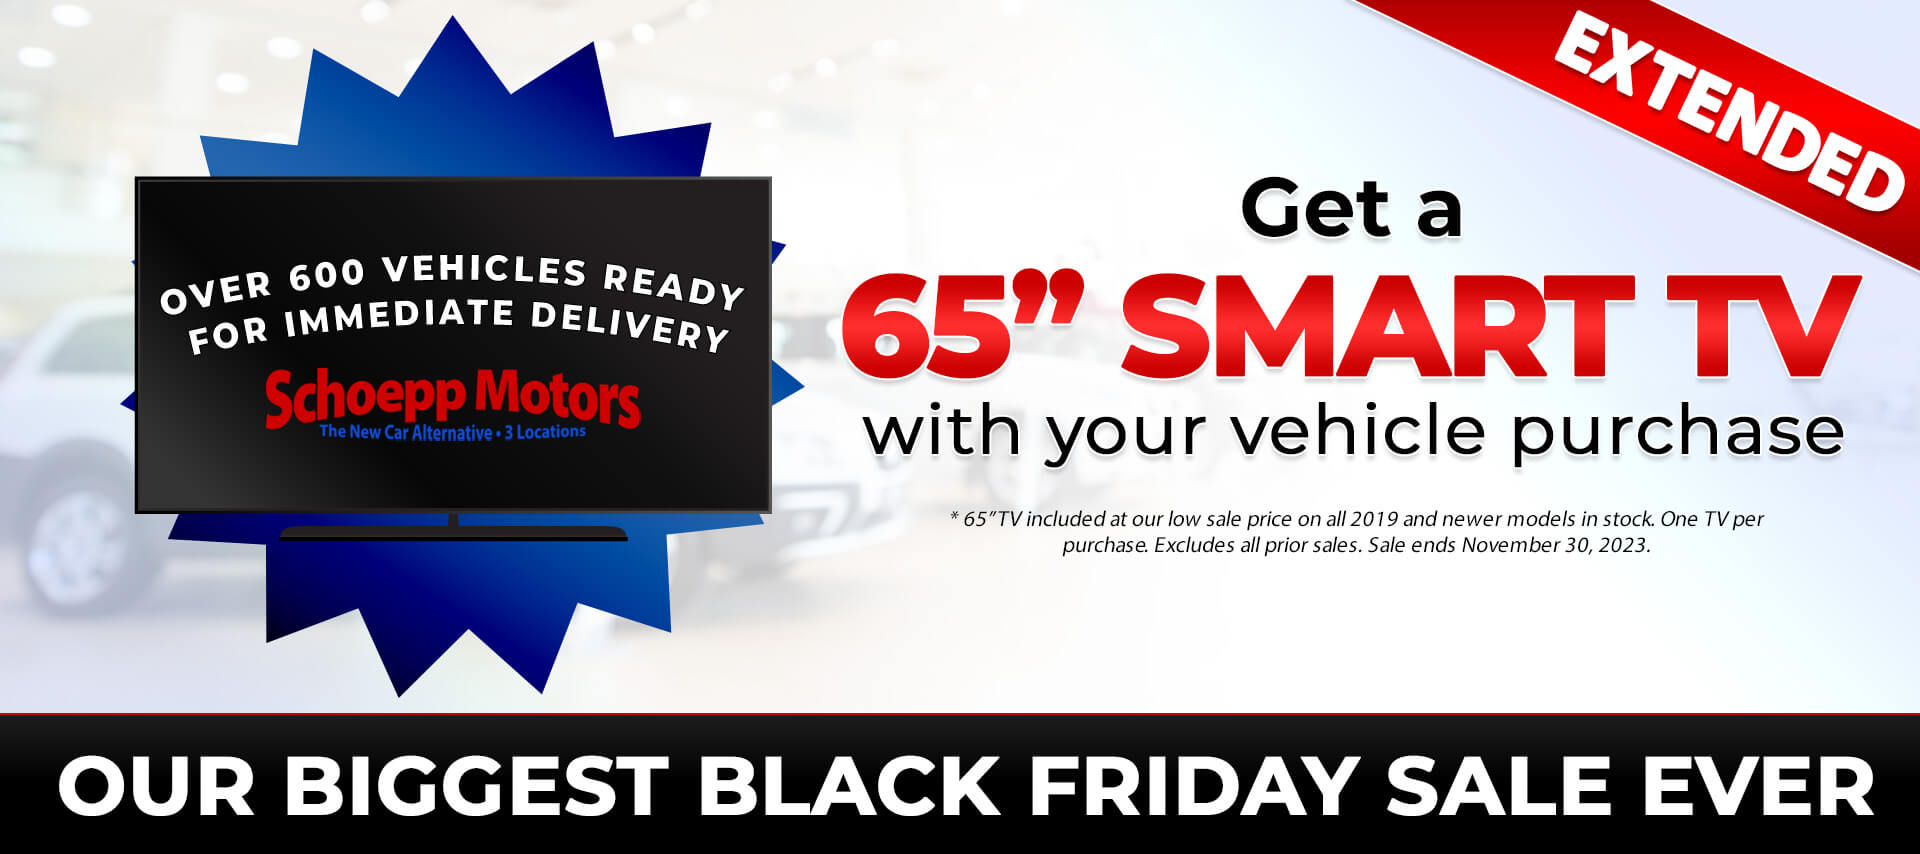 Black Friday - Free 65" TV with purchase